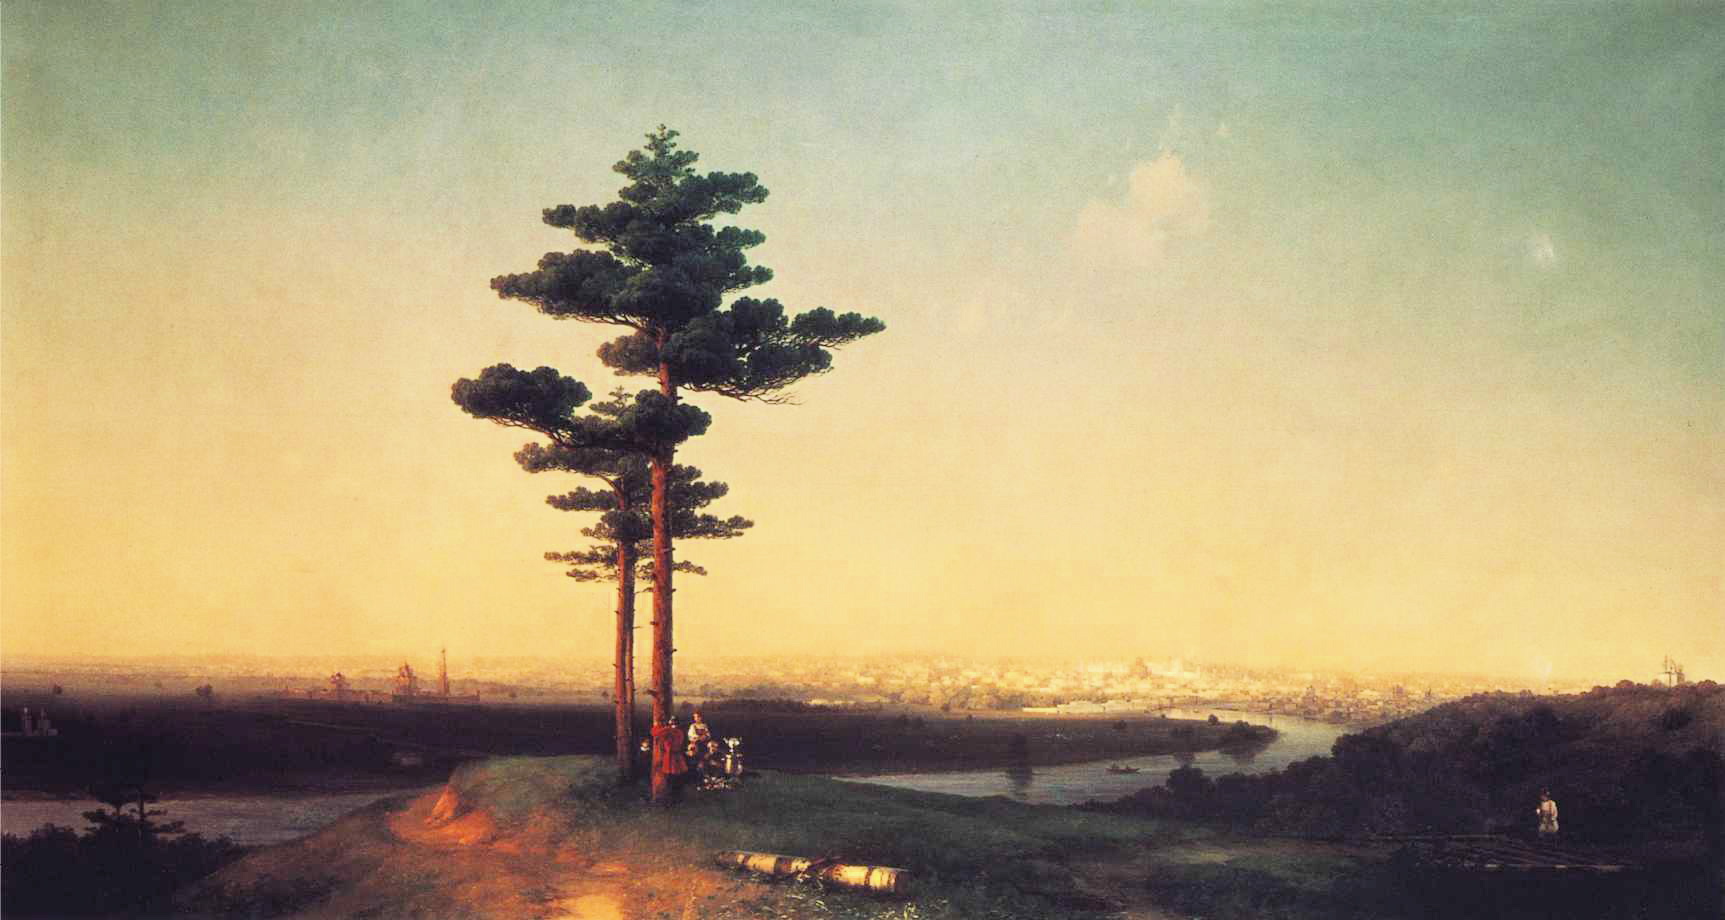 View of Moscow from Sparrow Hills (1851).